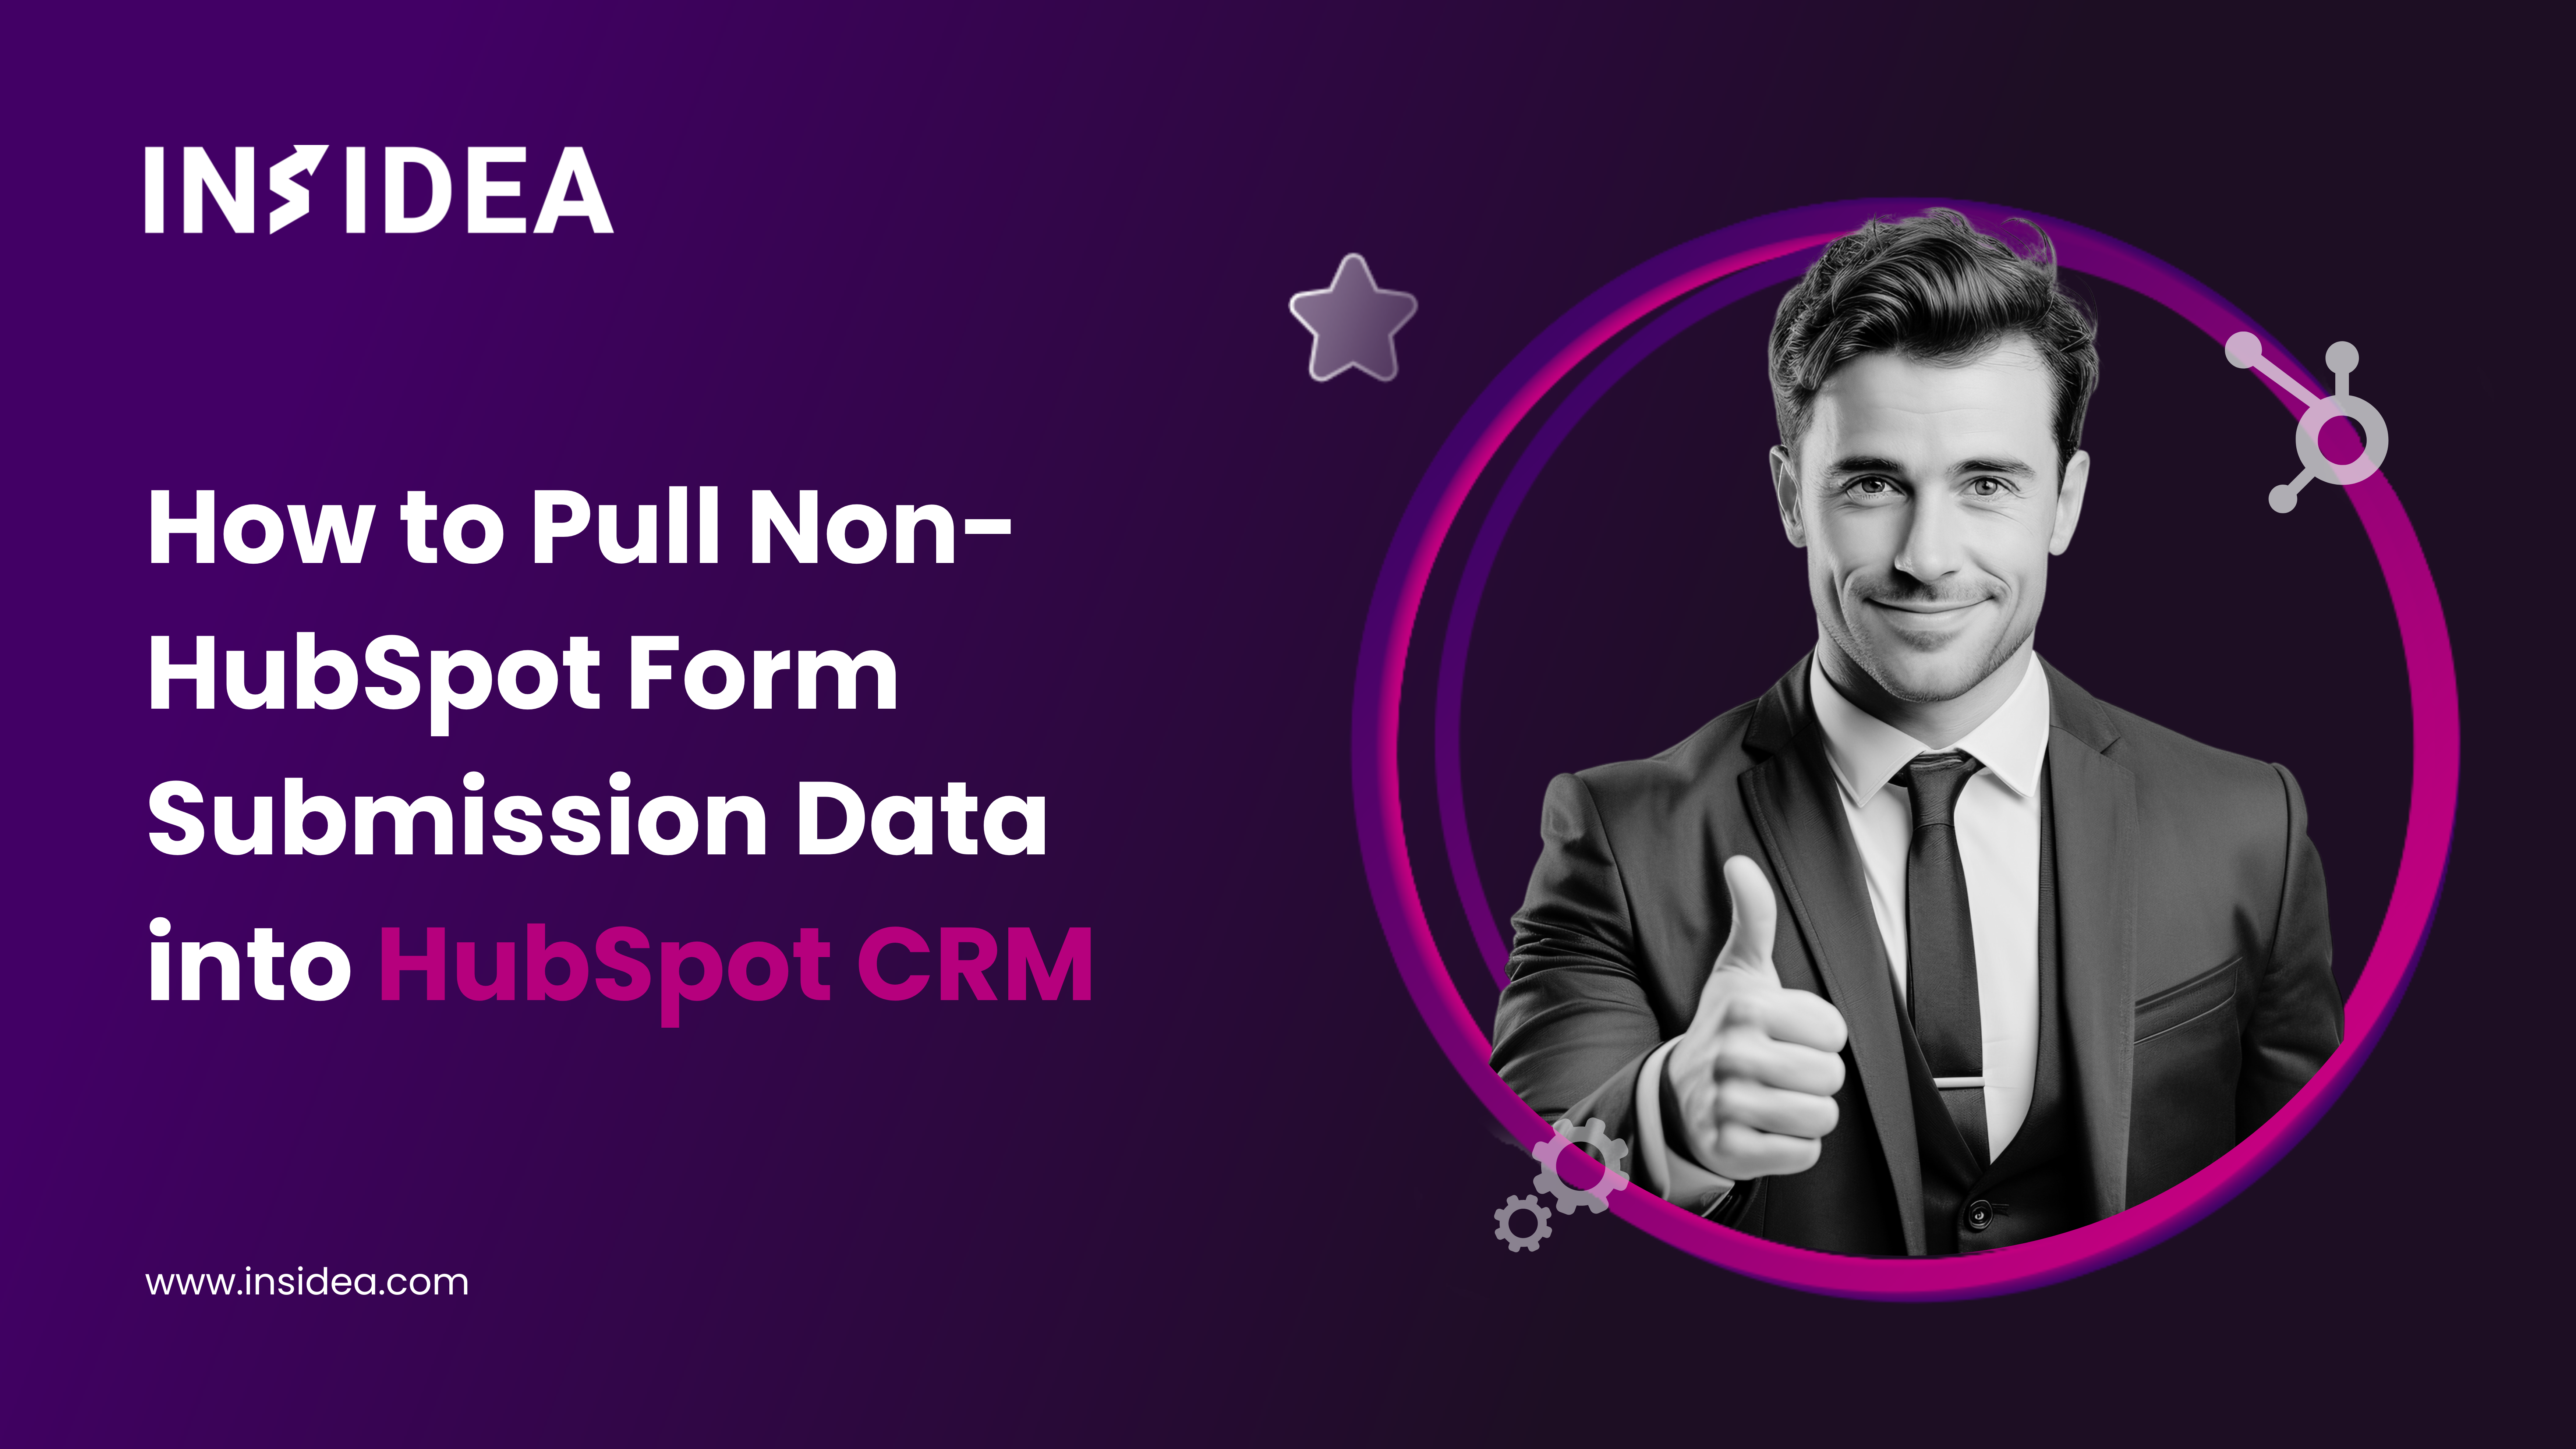 How to Pull Non-HubSpot Form Submission Data into HubSpot CRM